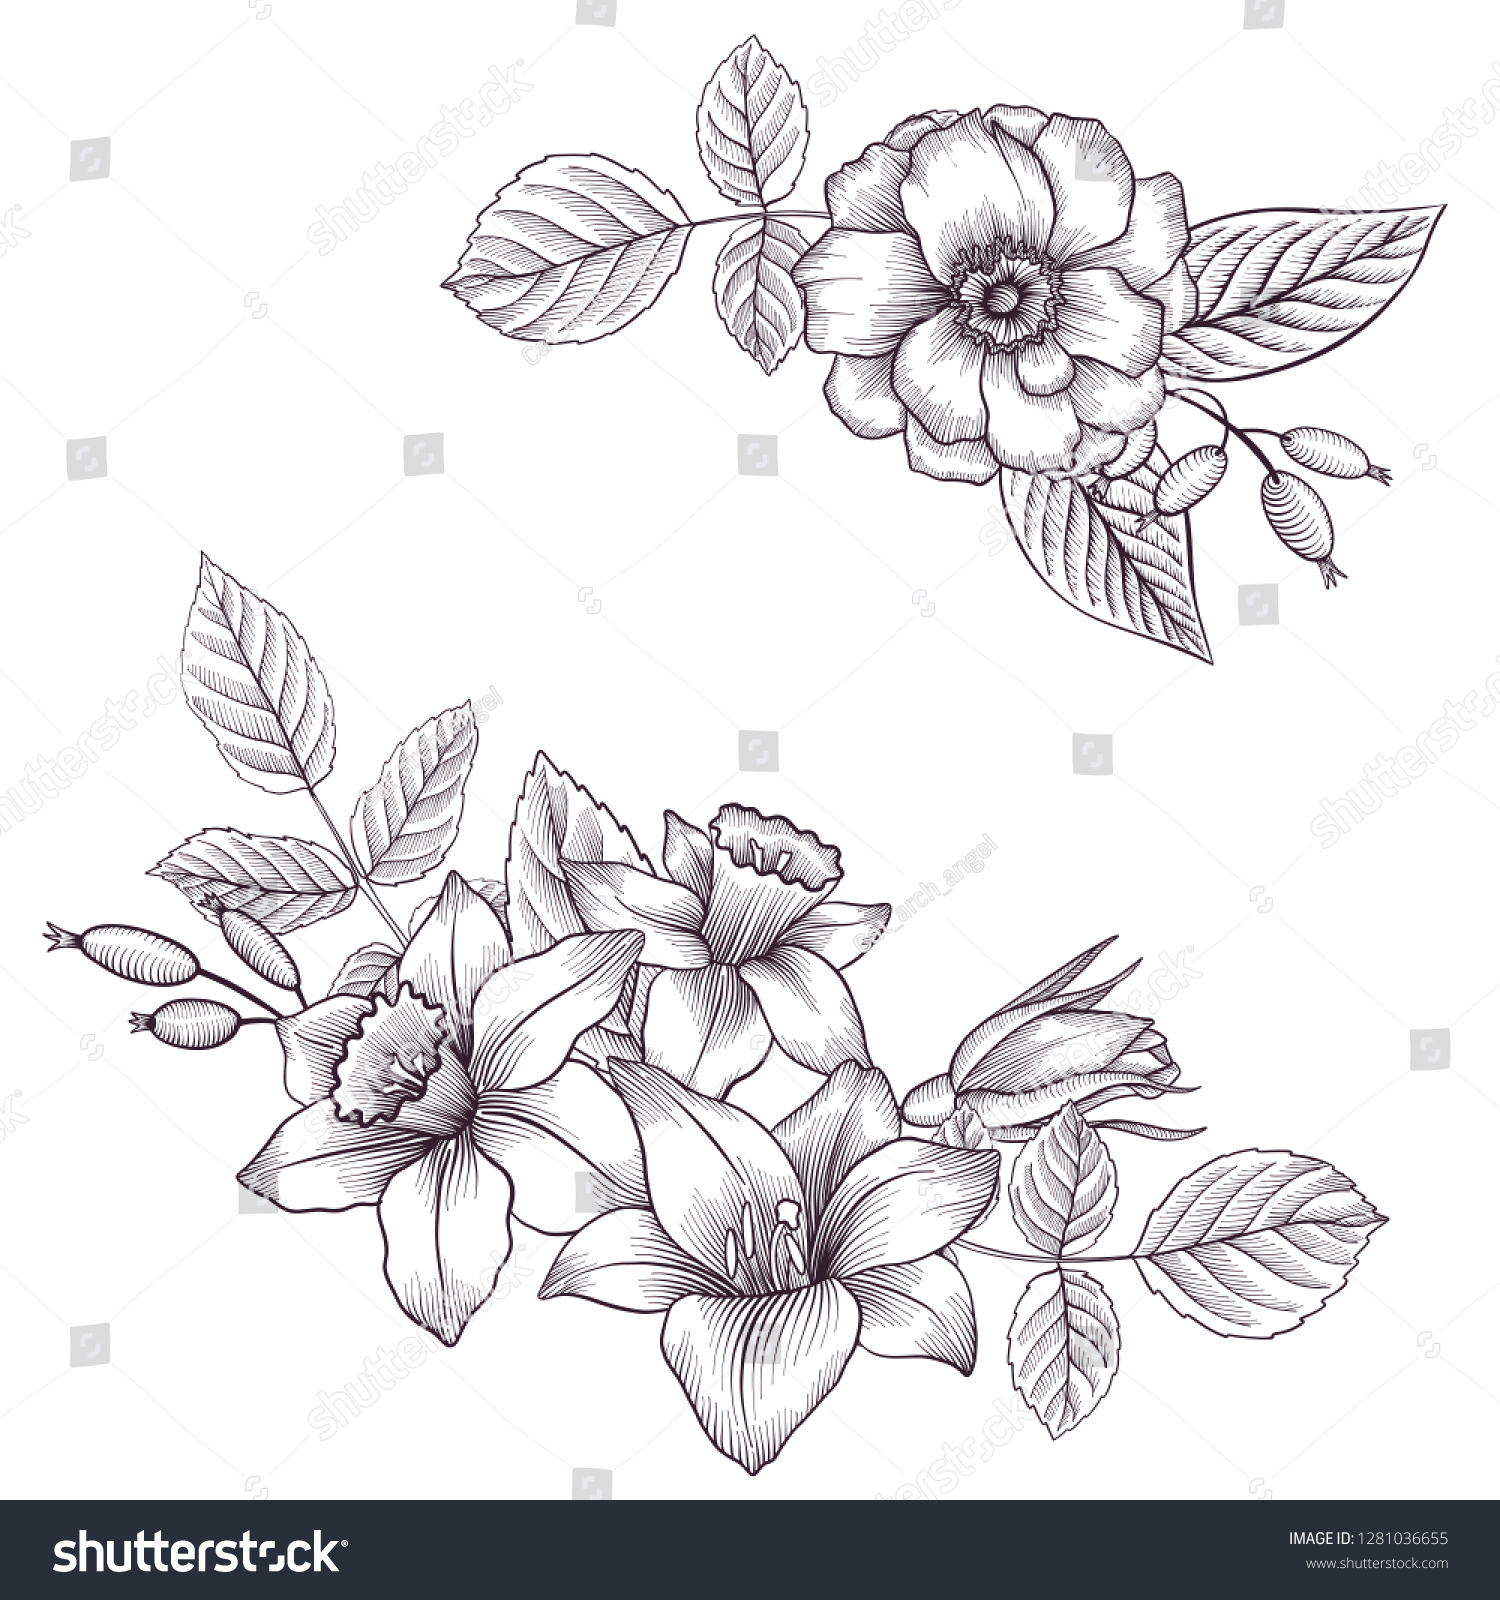 Vintage Vector Floral Composition Flowers Buds Stock Vector (Royalty ...